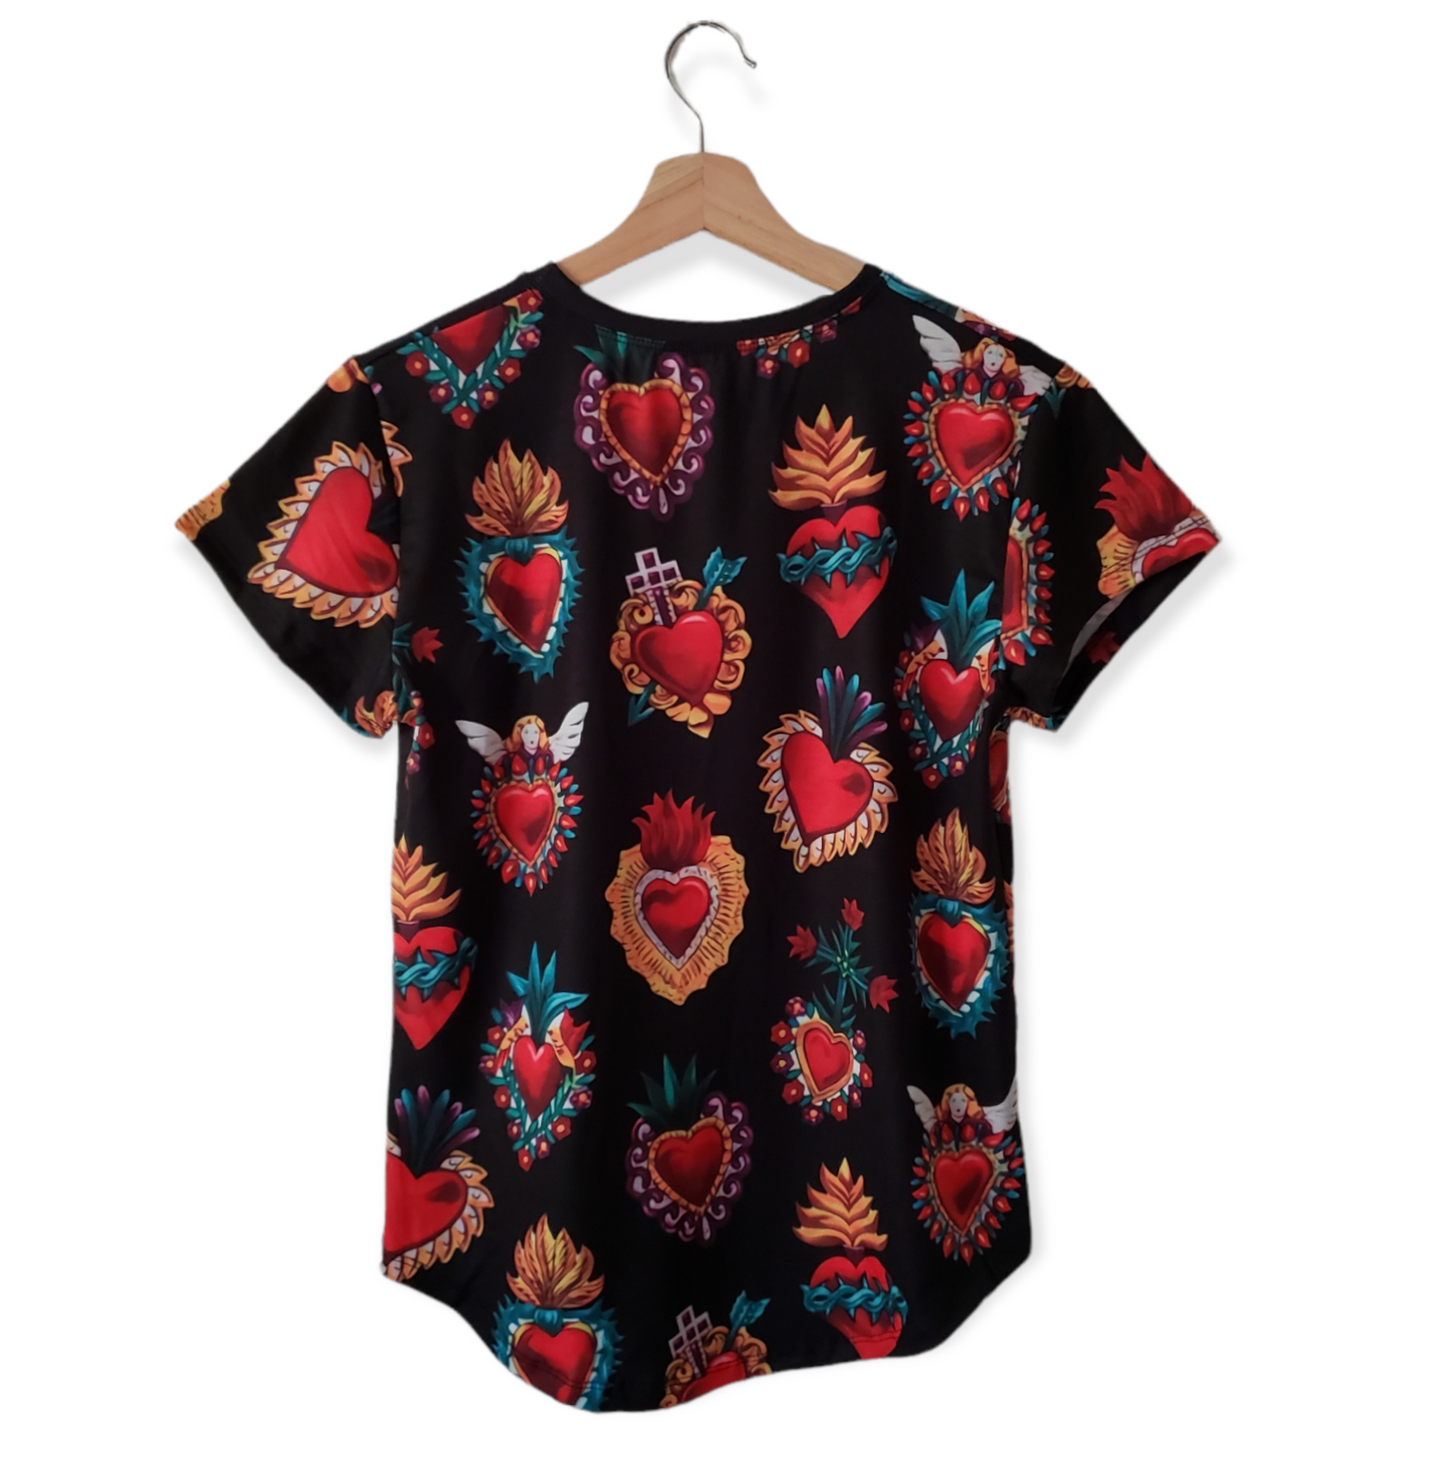 Milagros The Sacred Heart Graphic T-Shirt Black